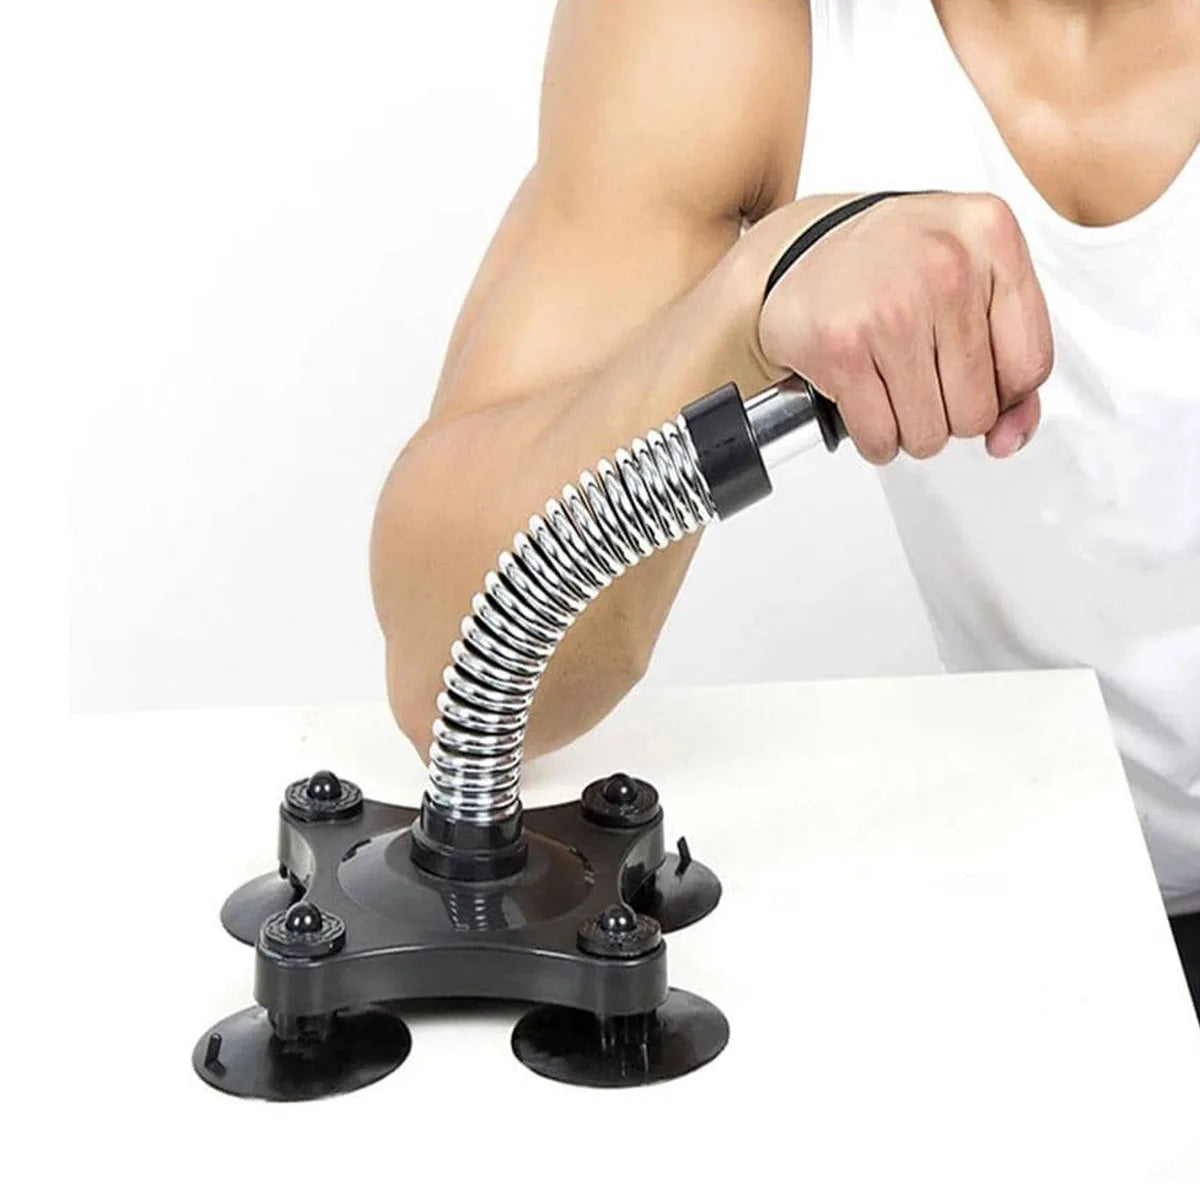 Portable Arm Wrestling Hand Grip Exerciser Wrist Muacle Power Strengthener For Gym Home Spring Forearm Workout Spring Equipments